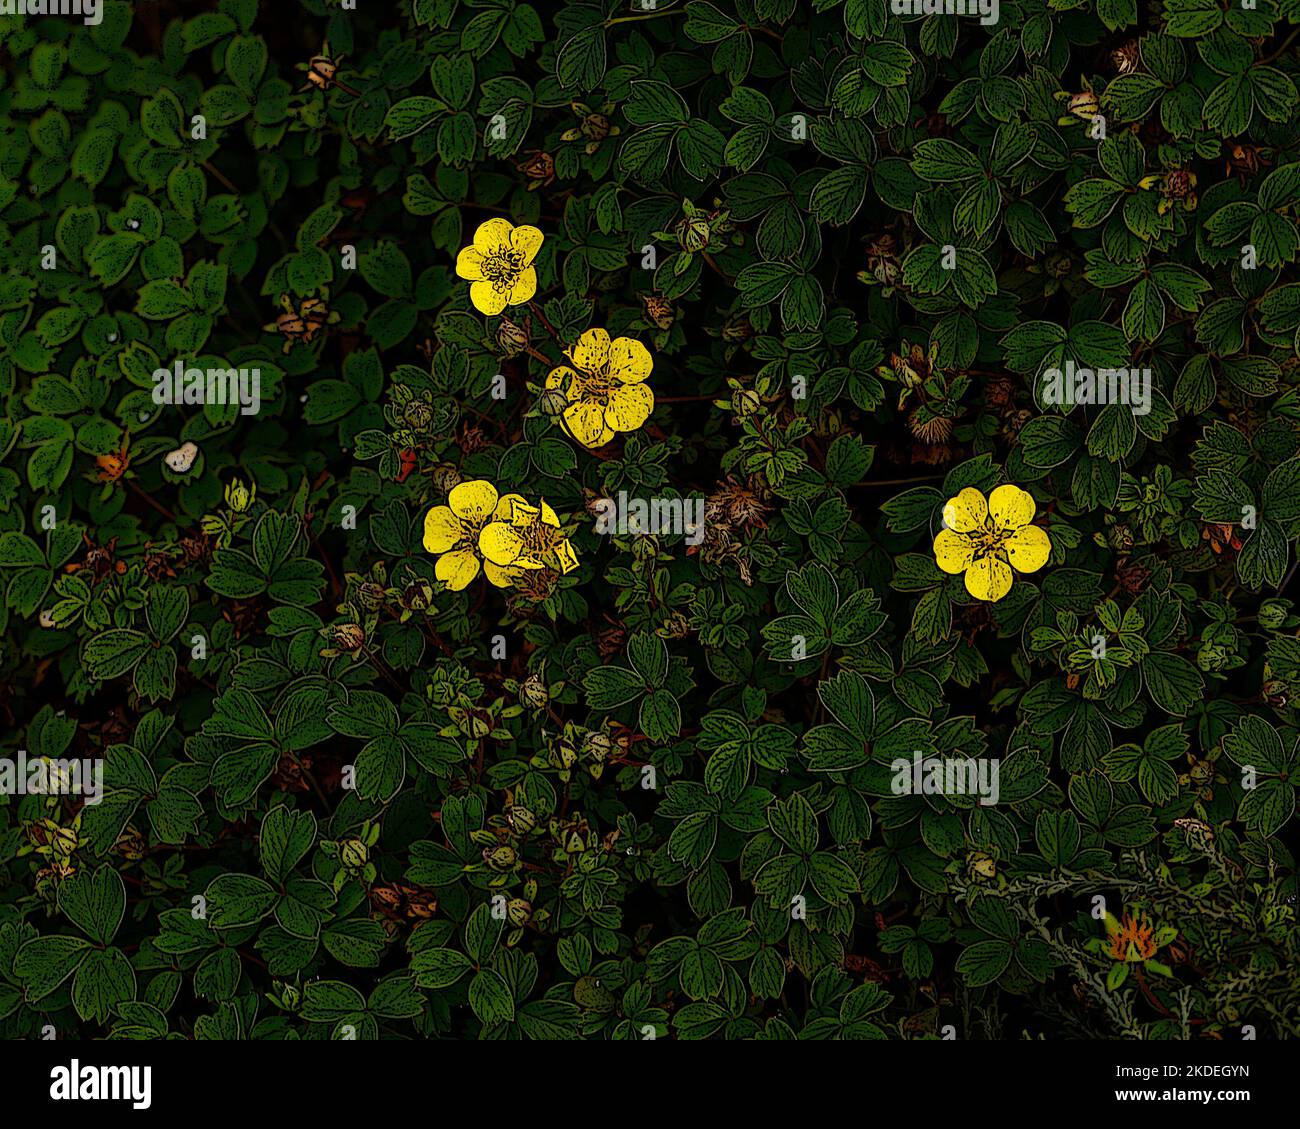 Illustrative close up of the yellow flowers and green leaves of the deciduous herbaceous perennial low growing garden plant Potentilla eriocarpa. Stock Photo